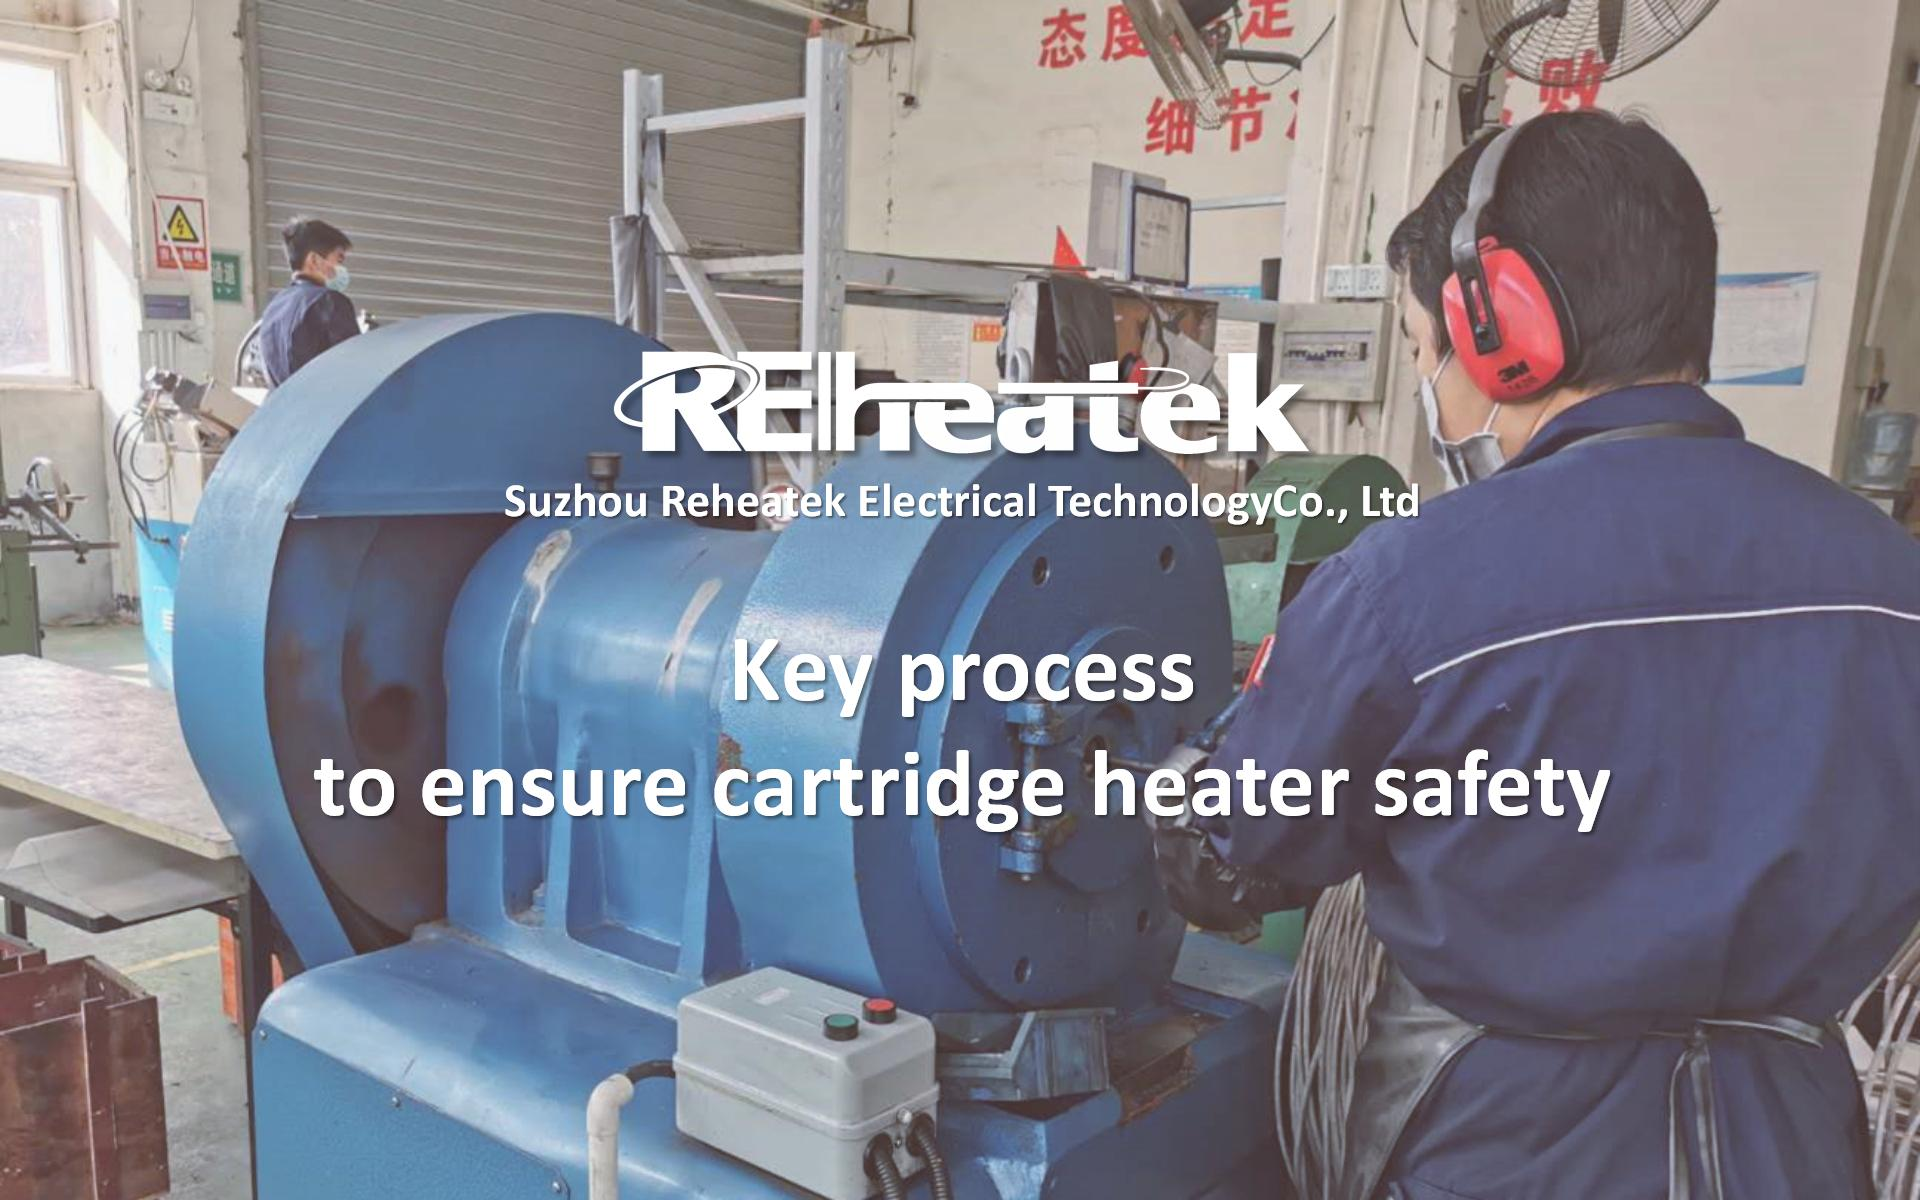 A key process to ensure cartridge heater safety